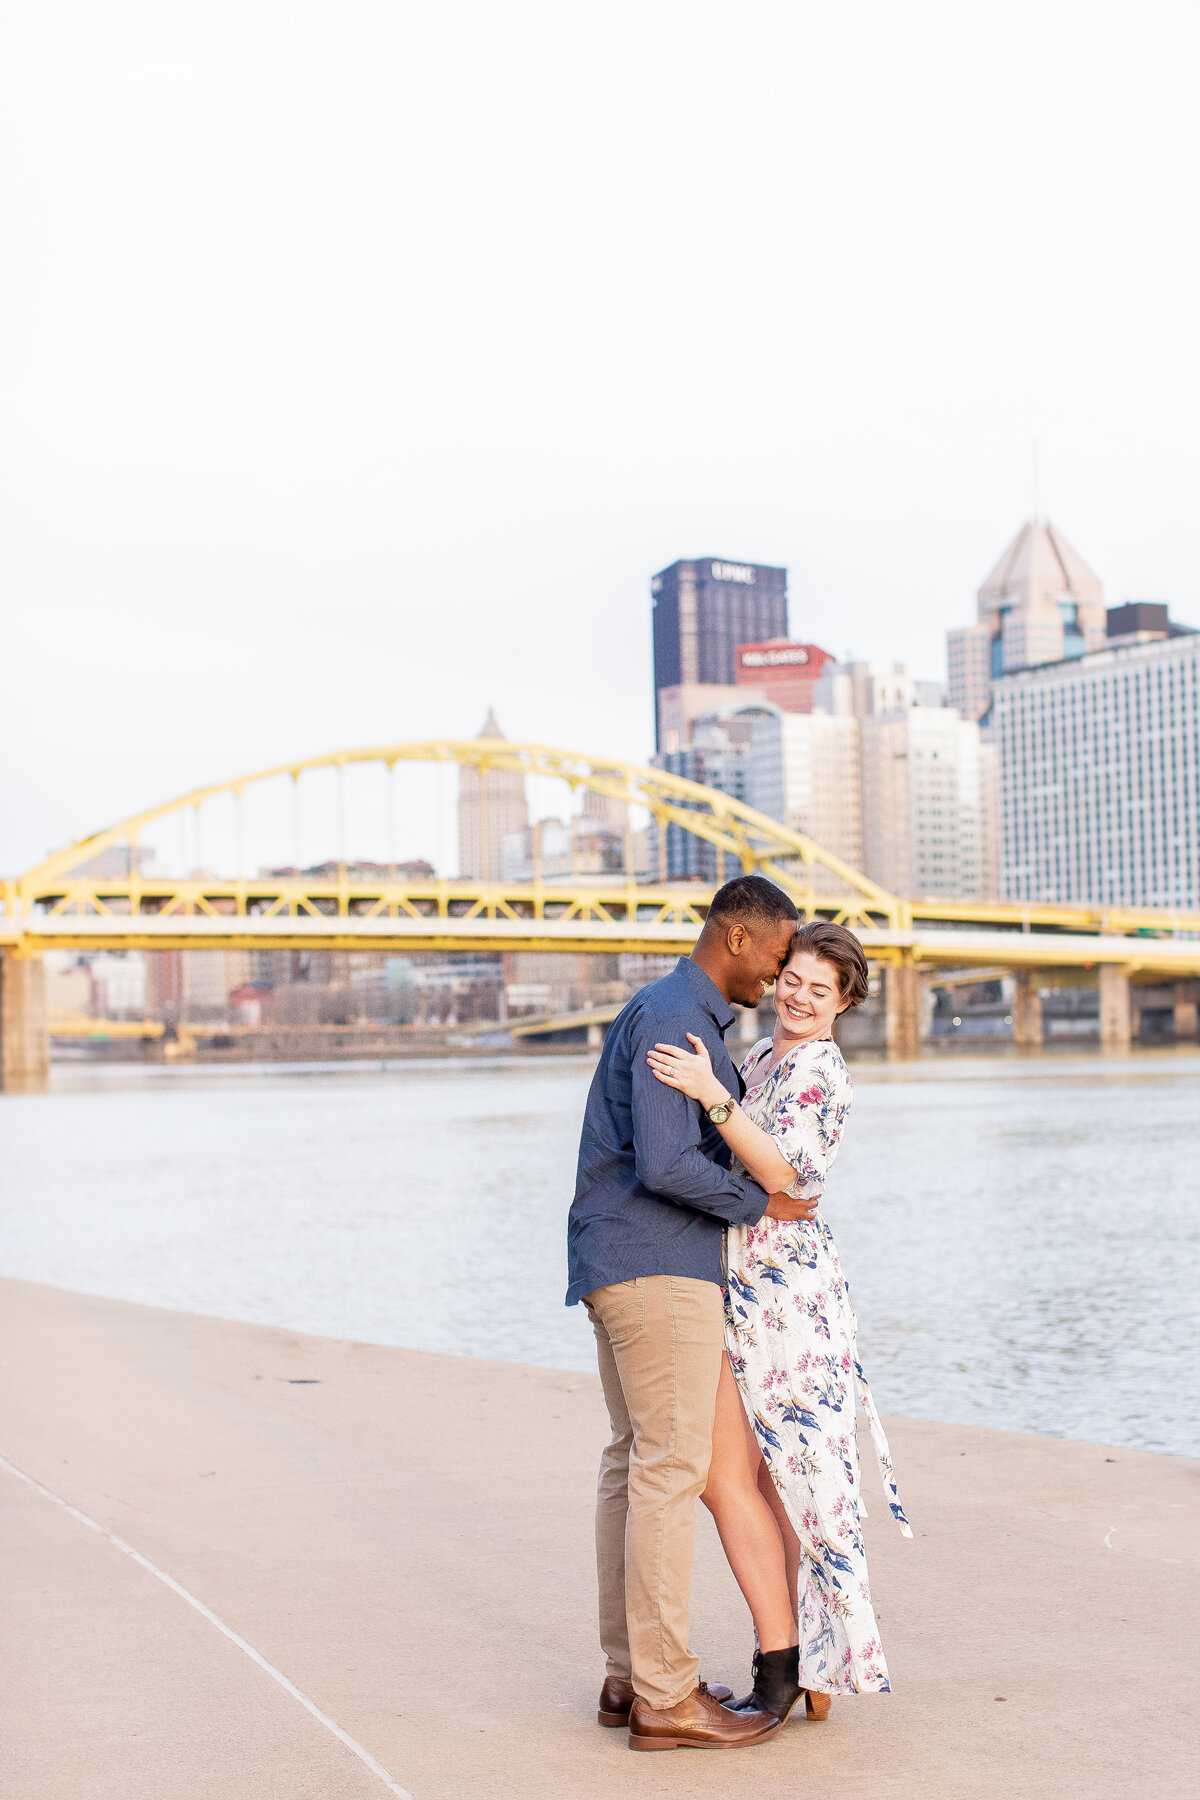 Engagement Photos South Side Pittsburgh, PA